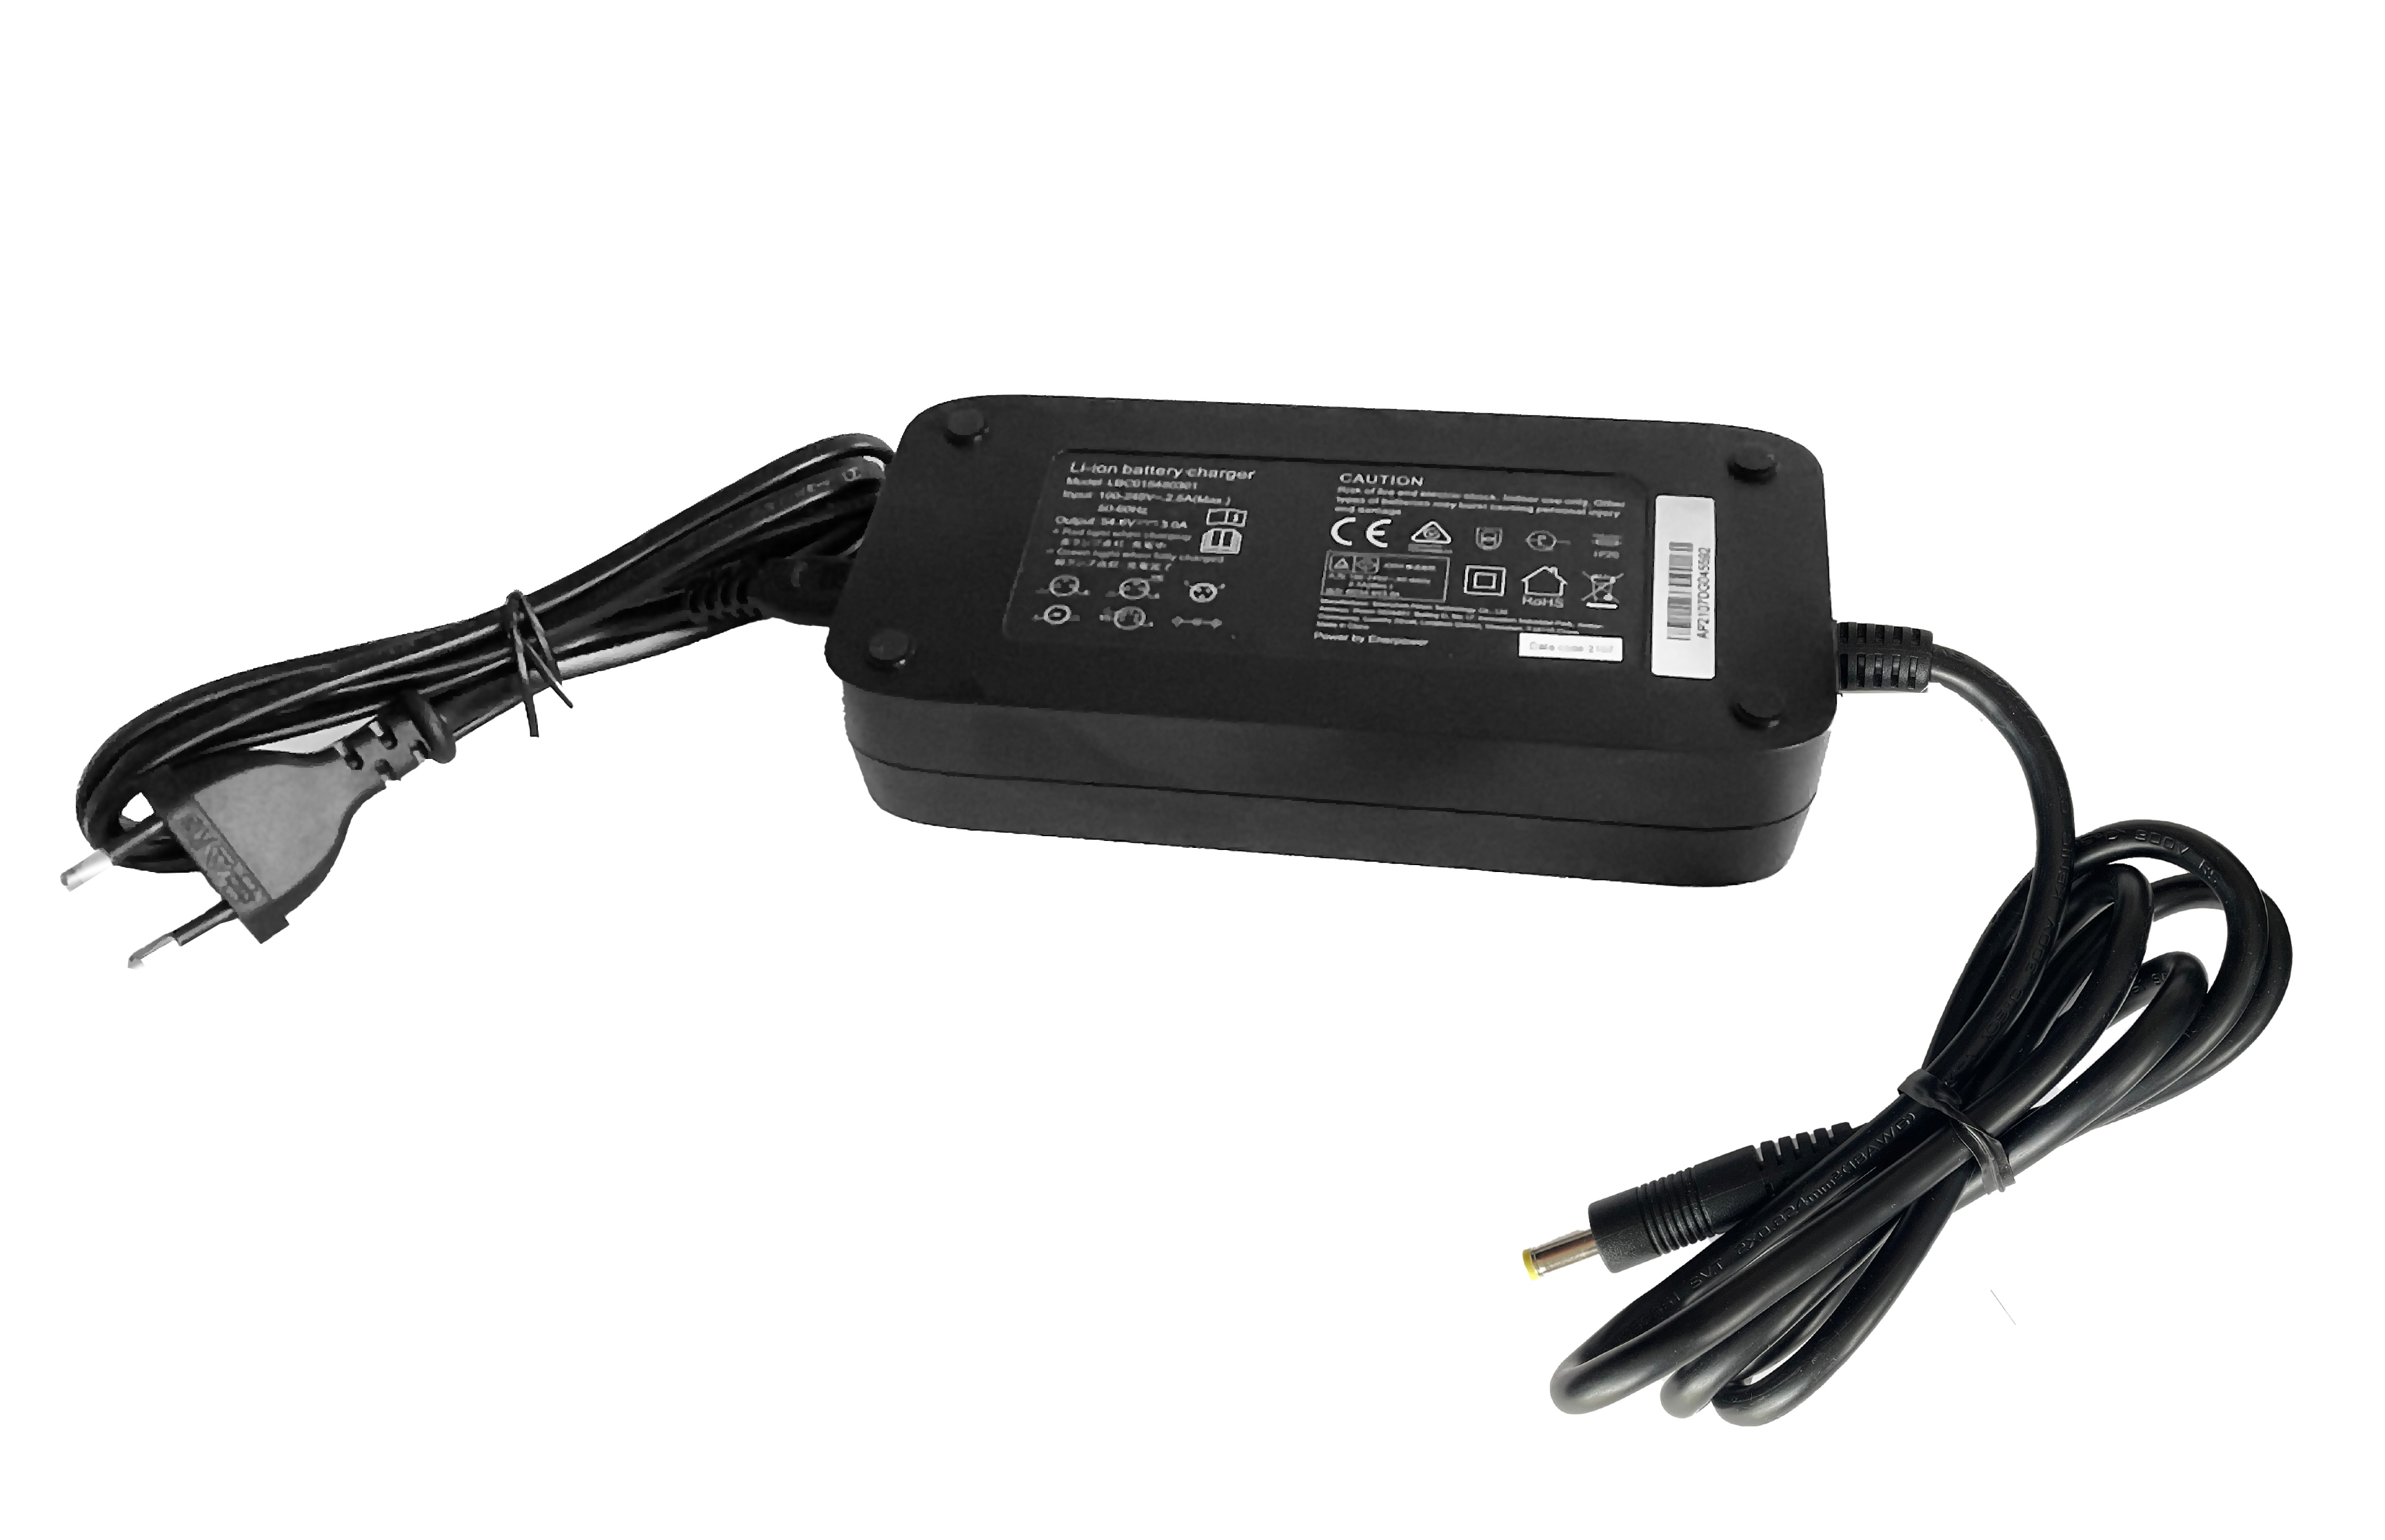 Atnen Charger 54.6V 3A DC 5.5 x 2.1 mm